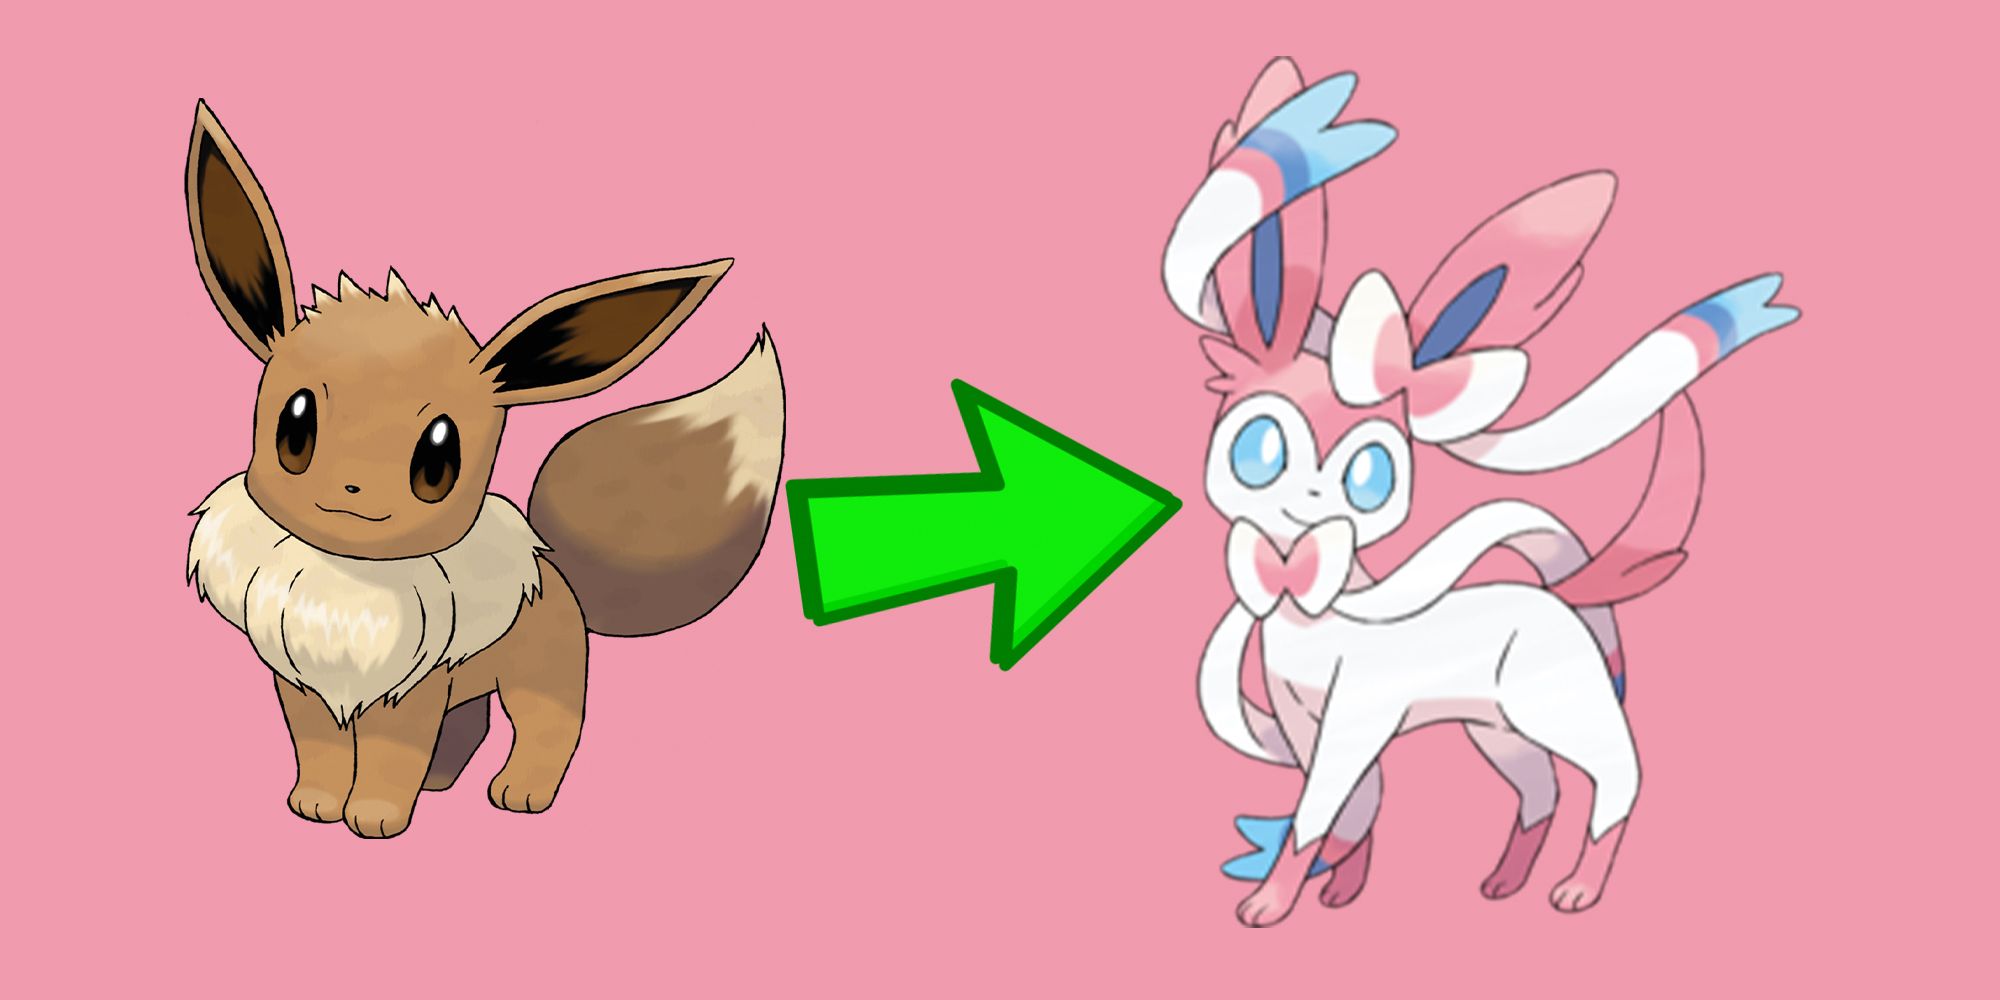 How to get sylveon in pokemon go